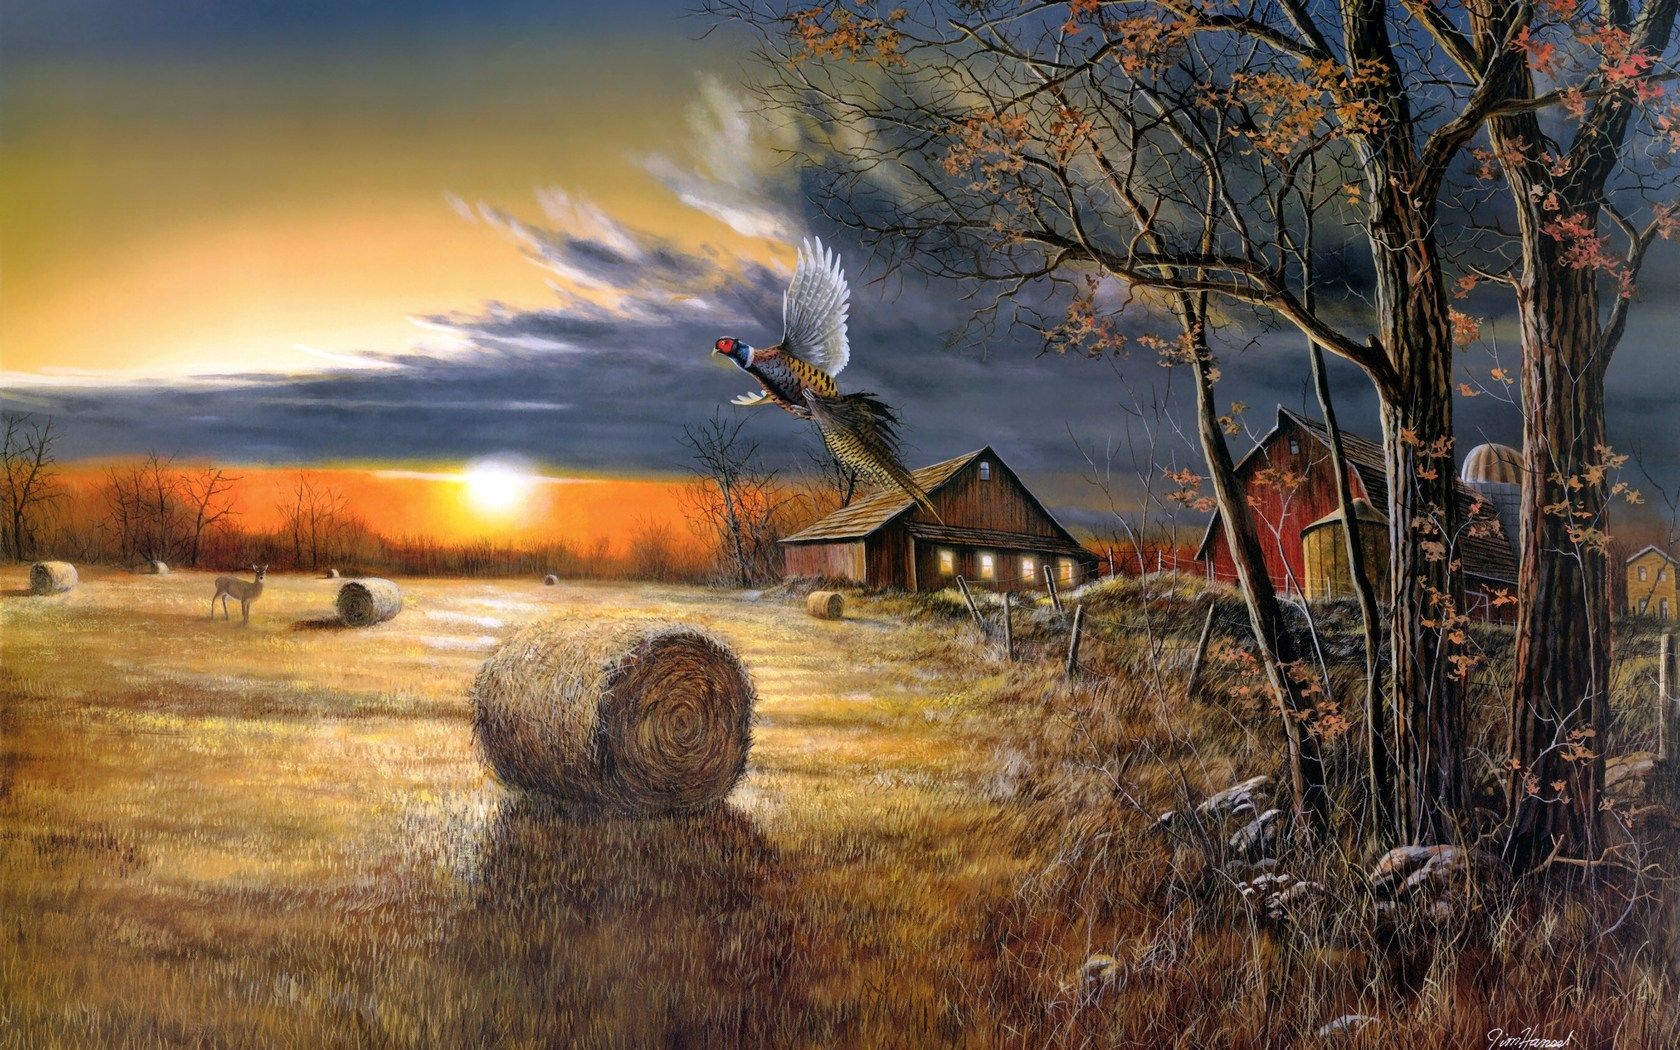 jim hansel, Artistic, Paintings, Prints, Country, Rustic, Farmlands, Landscapes, Sunsets, Sunrises, Scenic, Autumn, Fall, Seasons Wallpaper HD / Desktop and Mobile Background